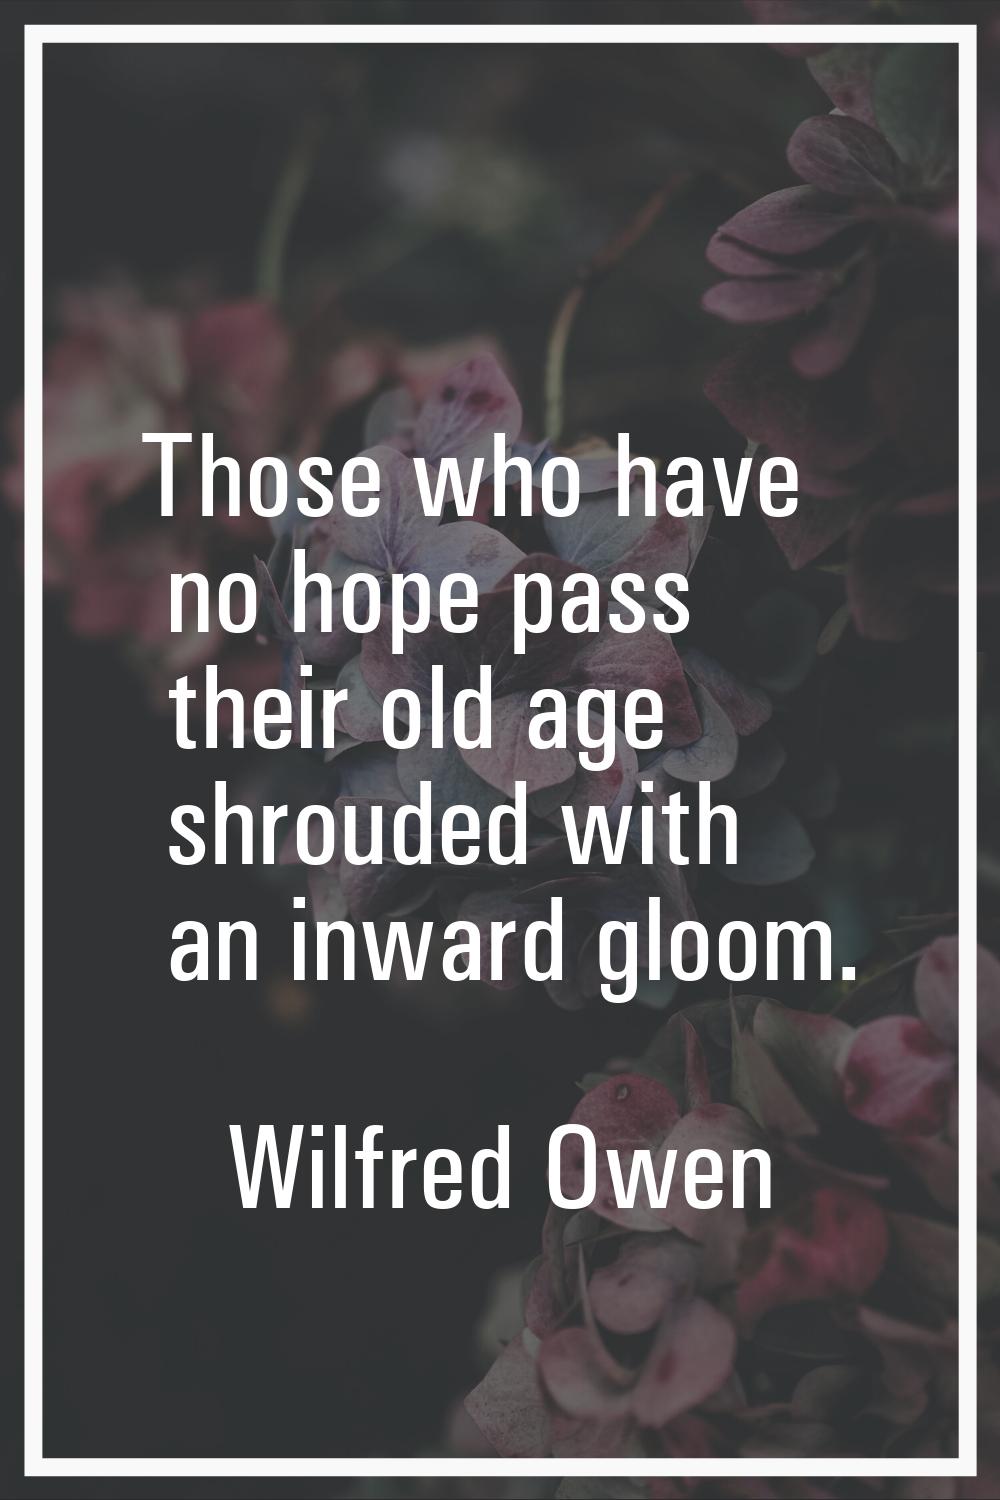 Those who have no hope pass their old age shrouded with an inward gloom.